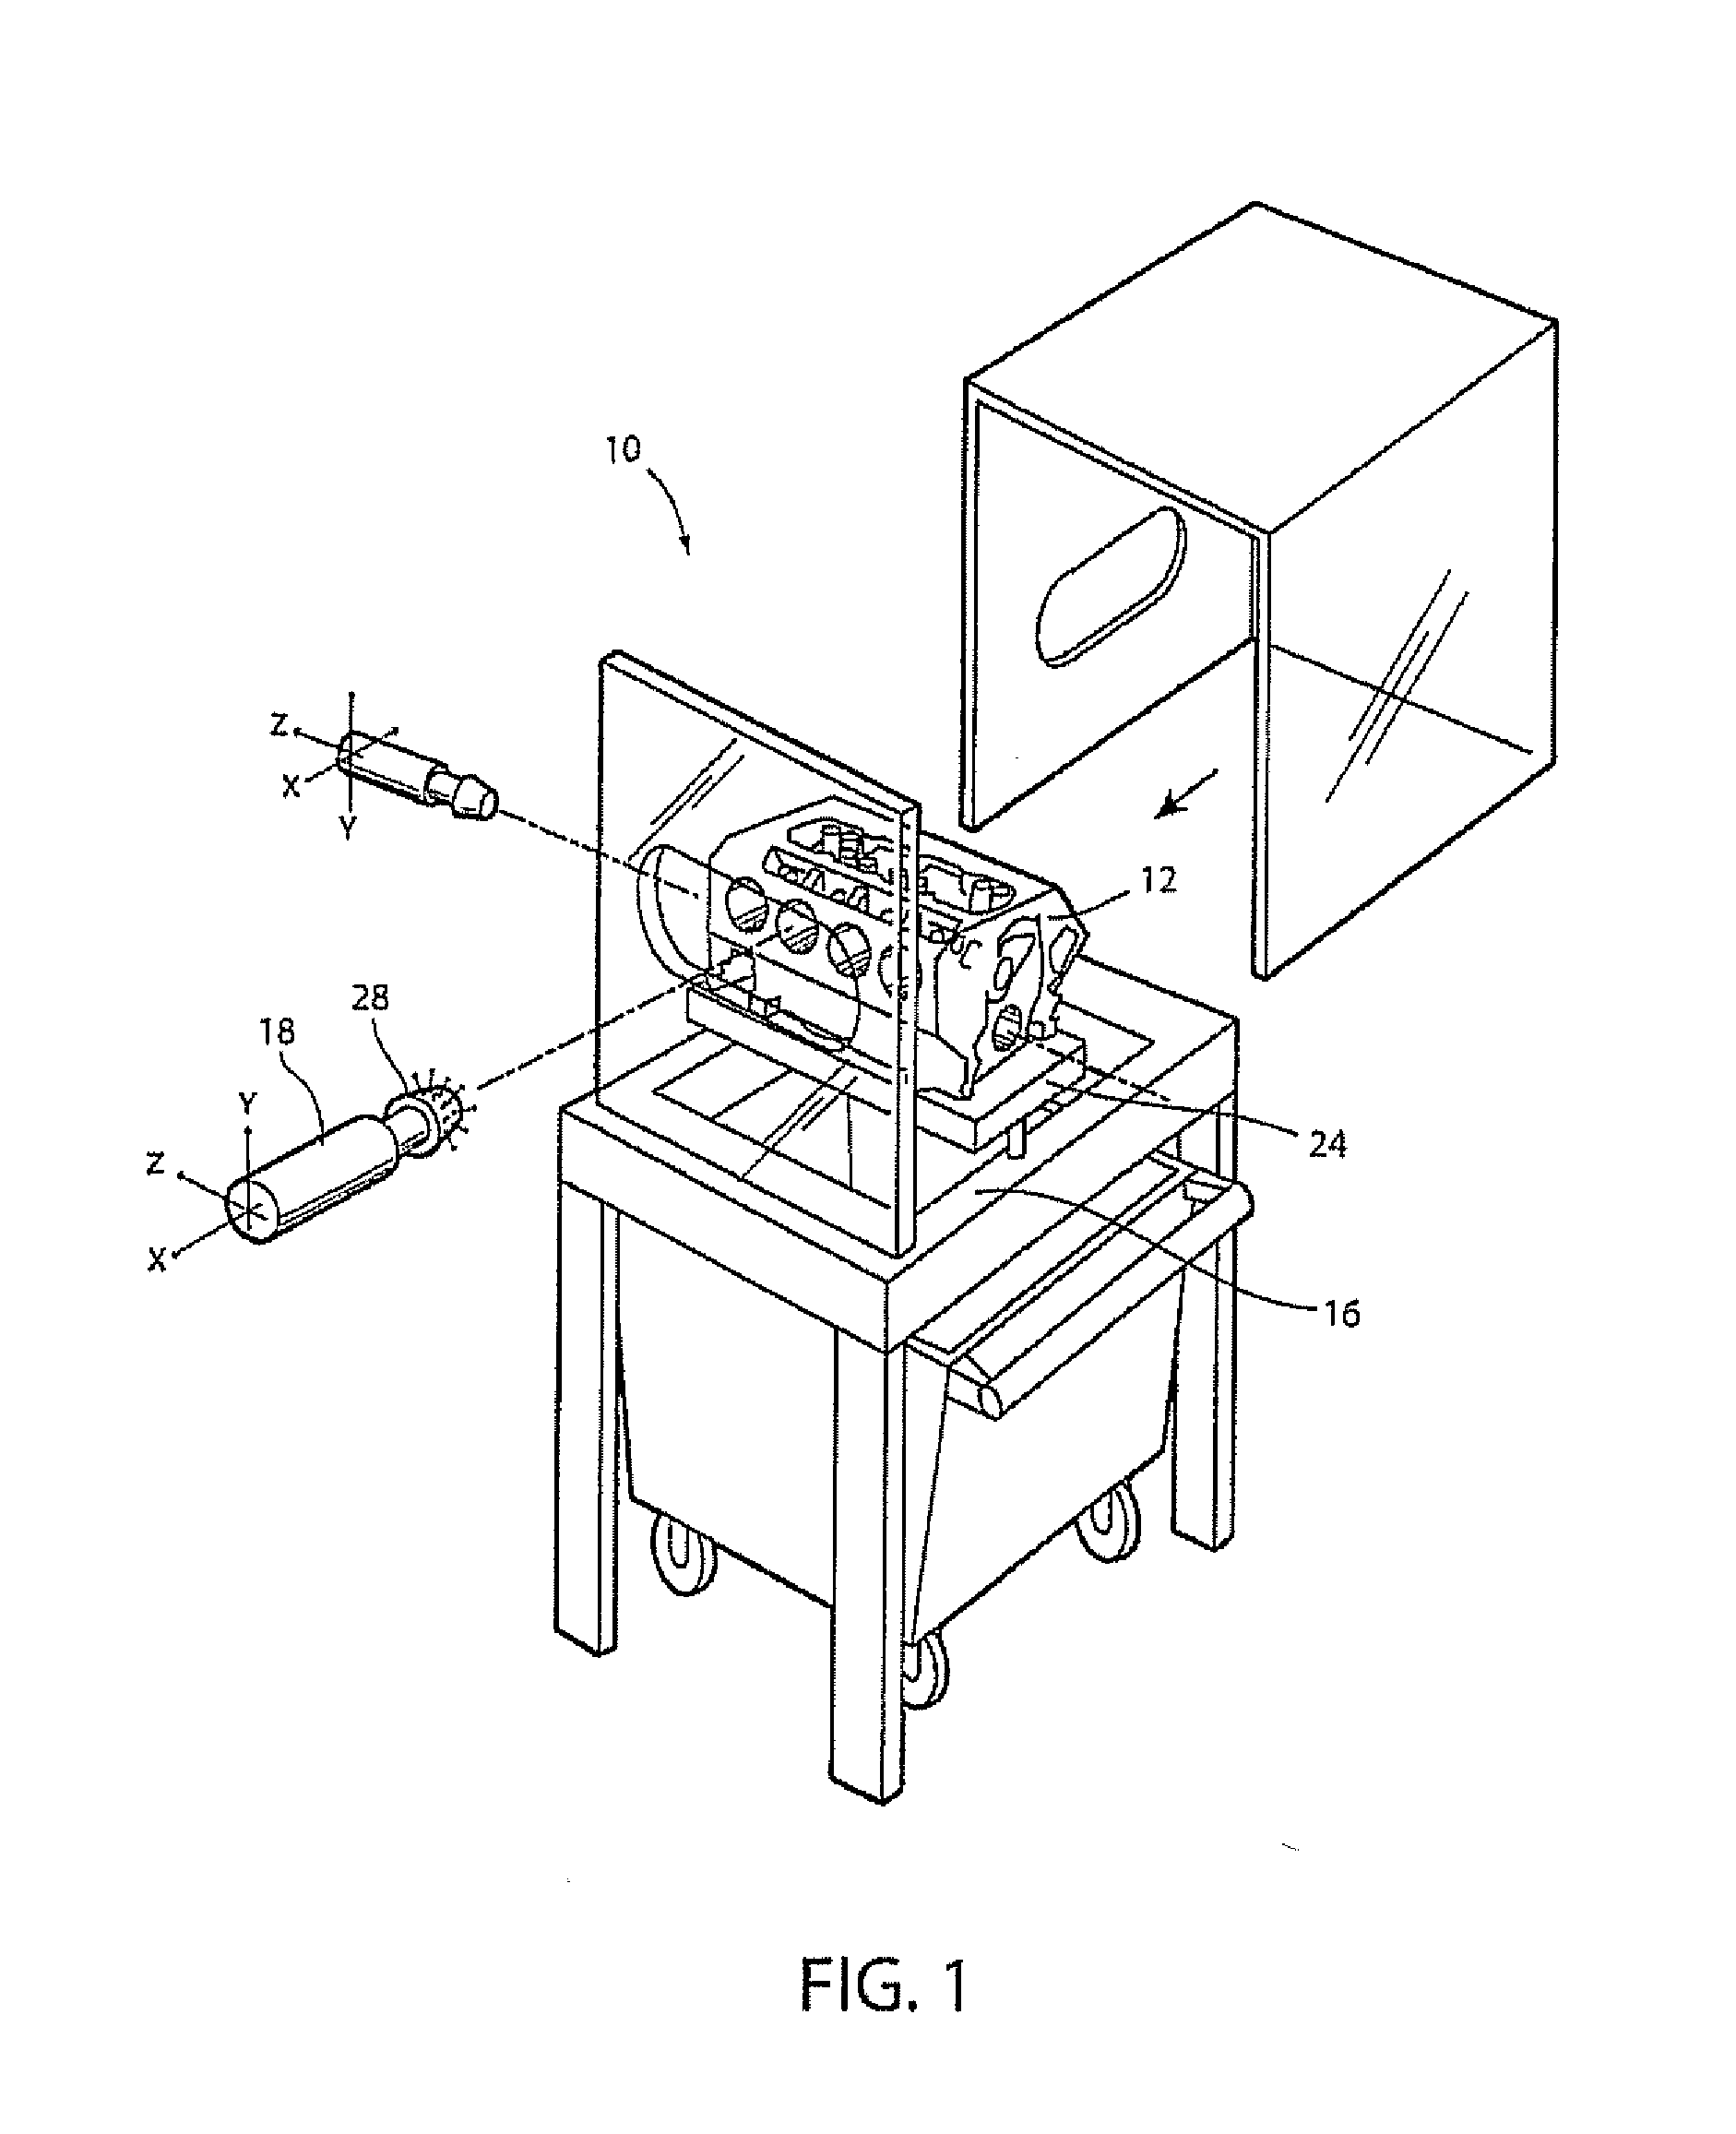 Apparatus for inspecting machined bores